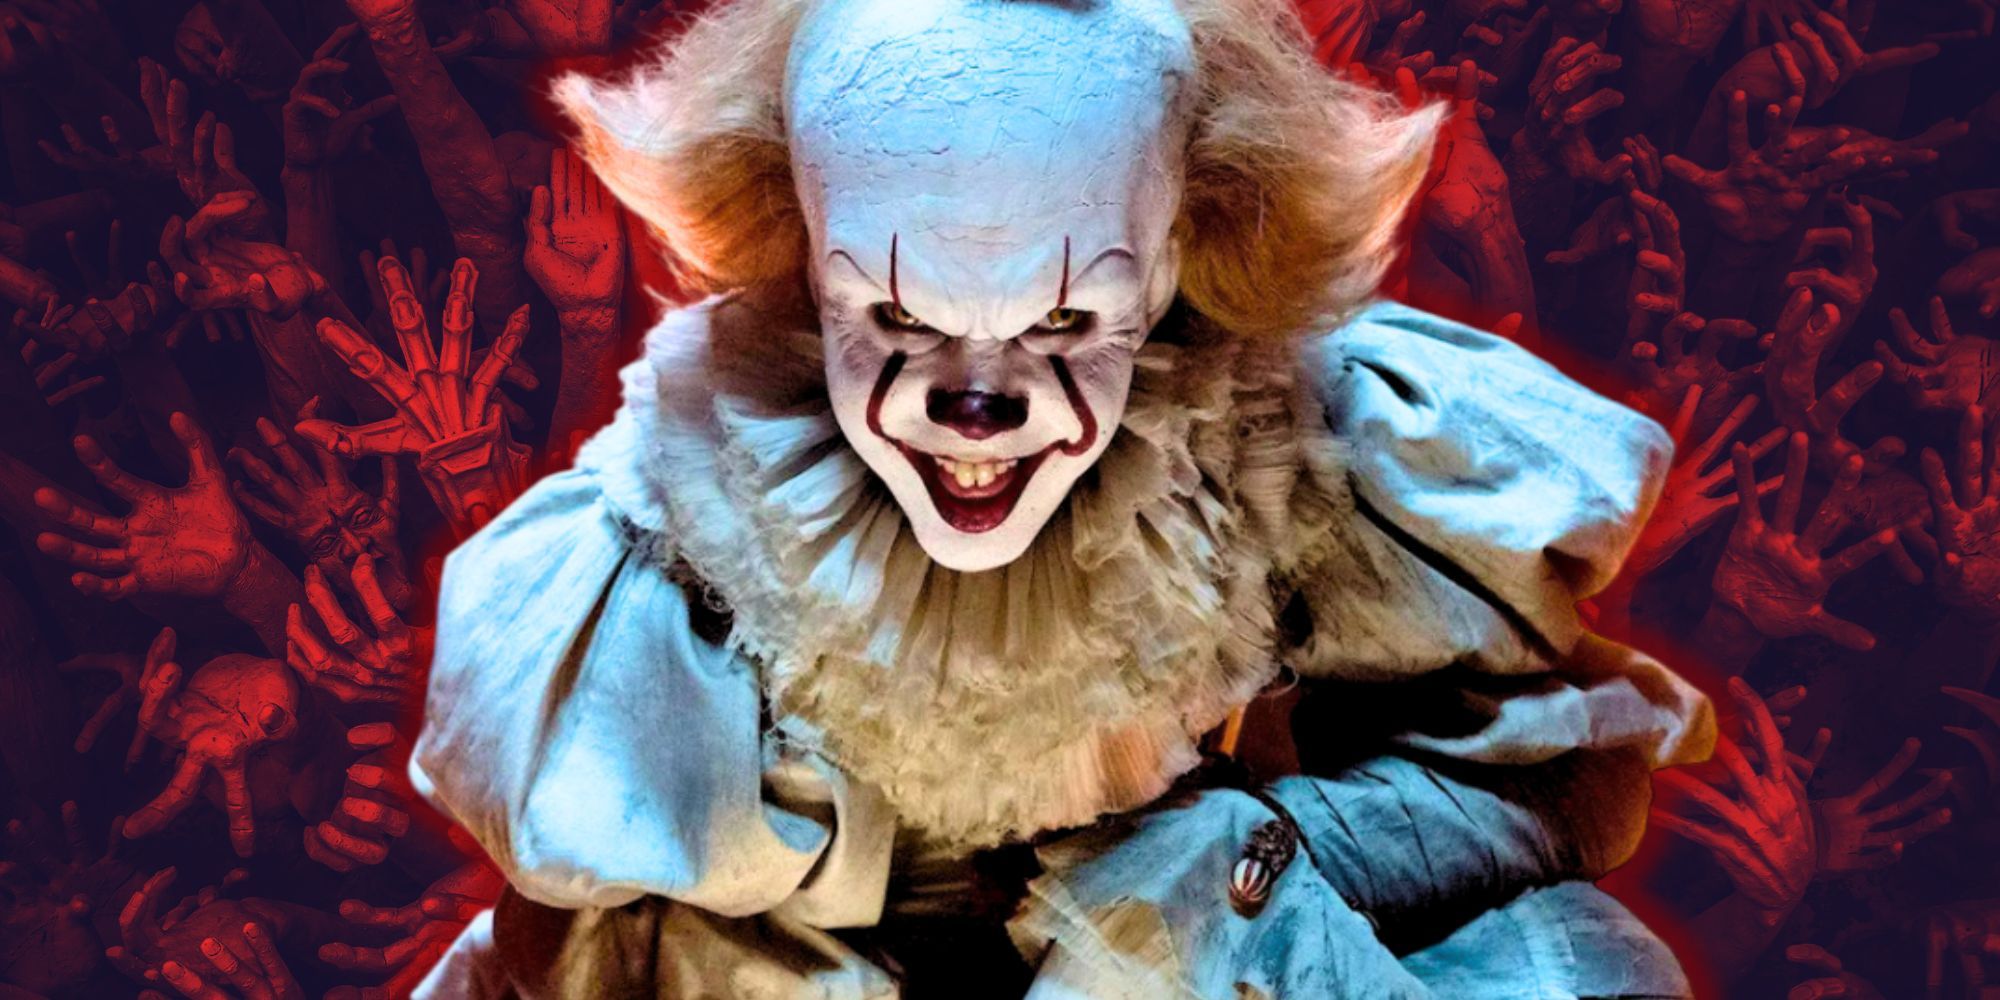 Pennywise from the IT movies